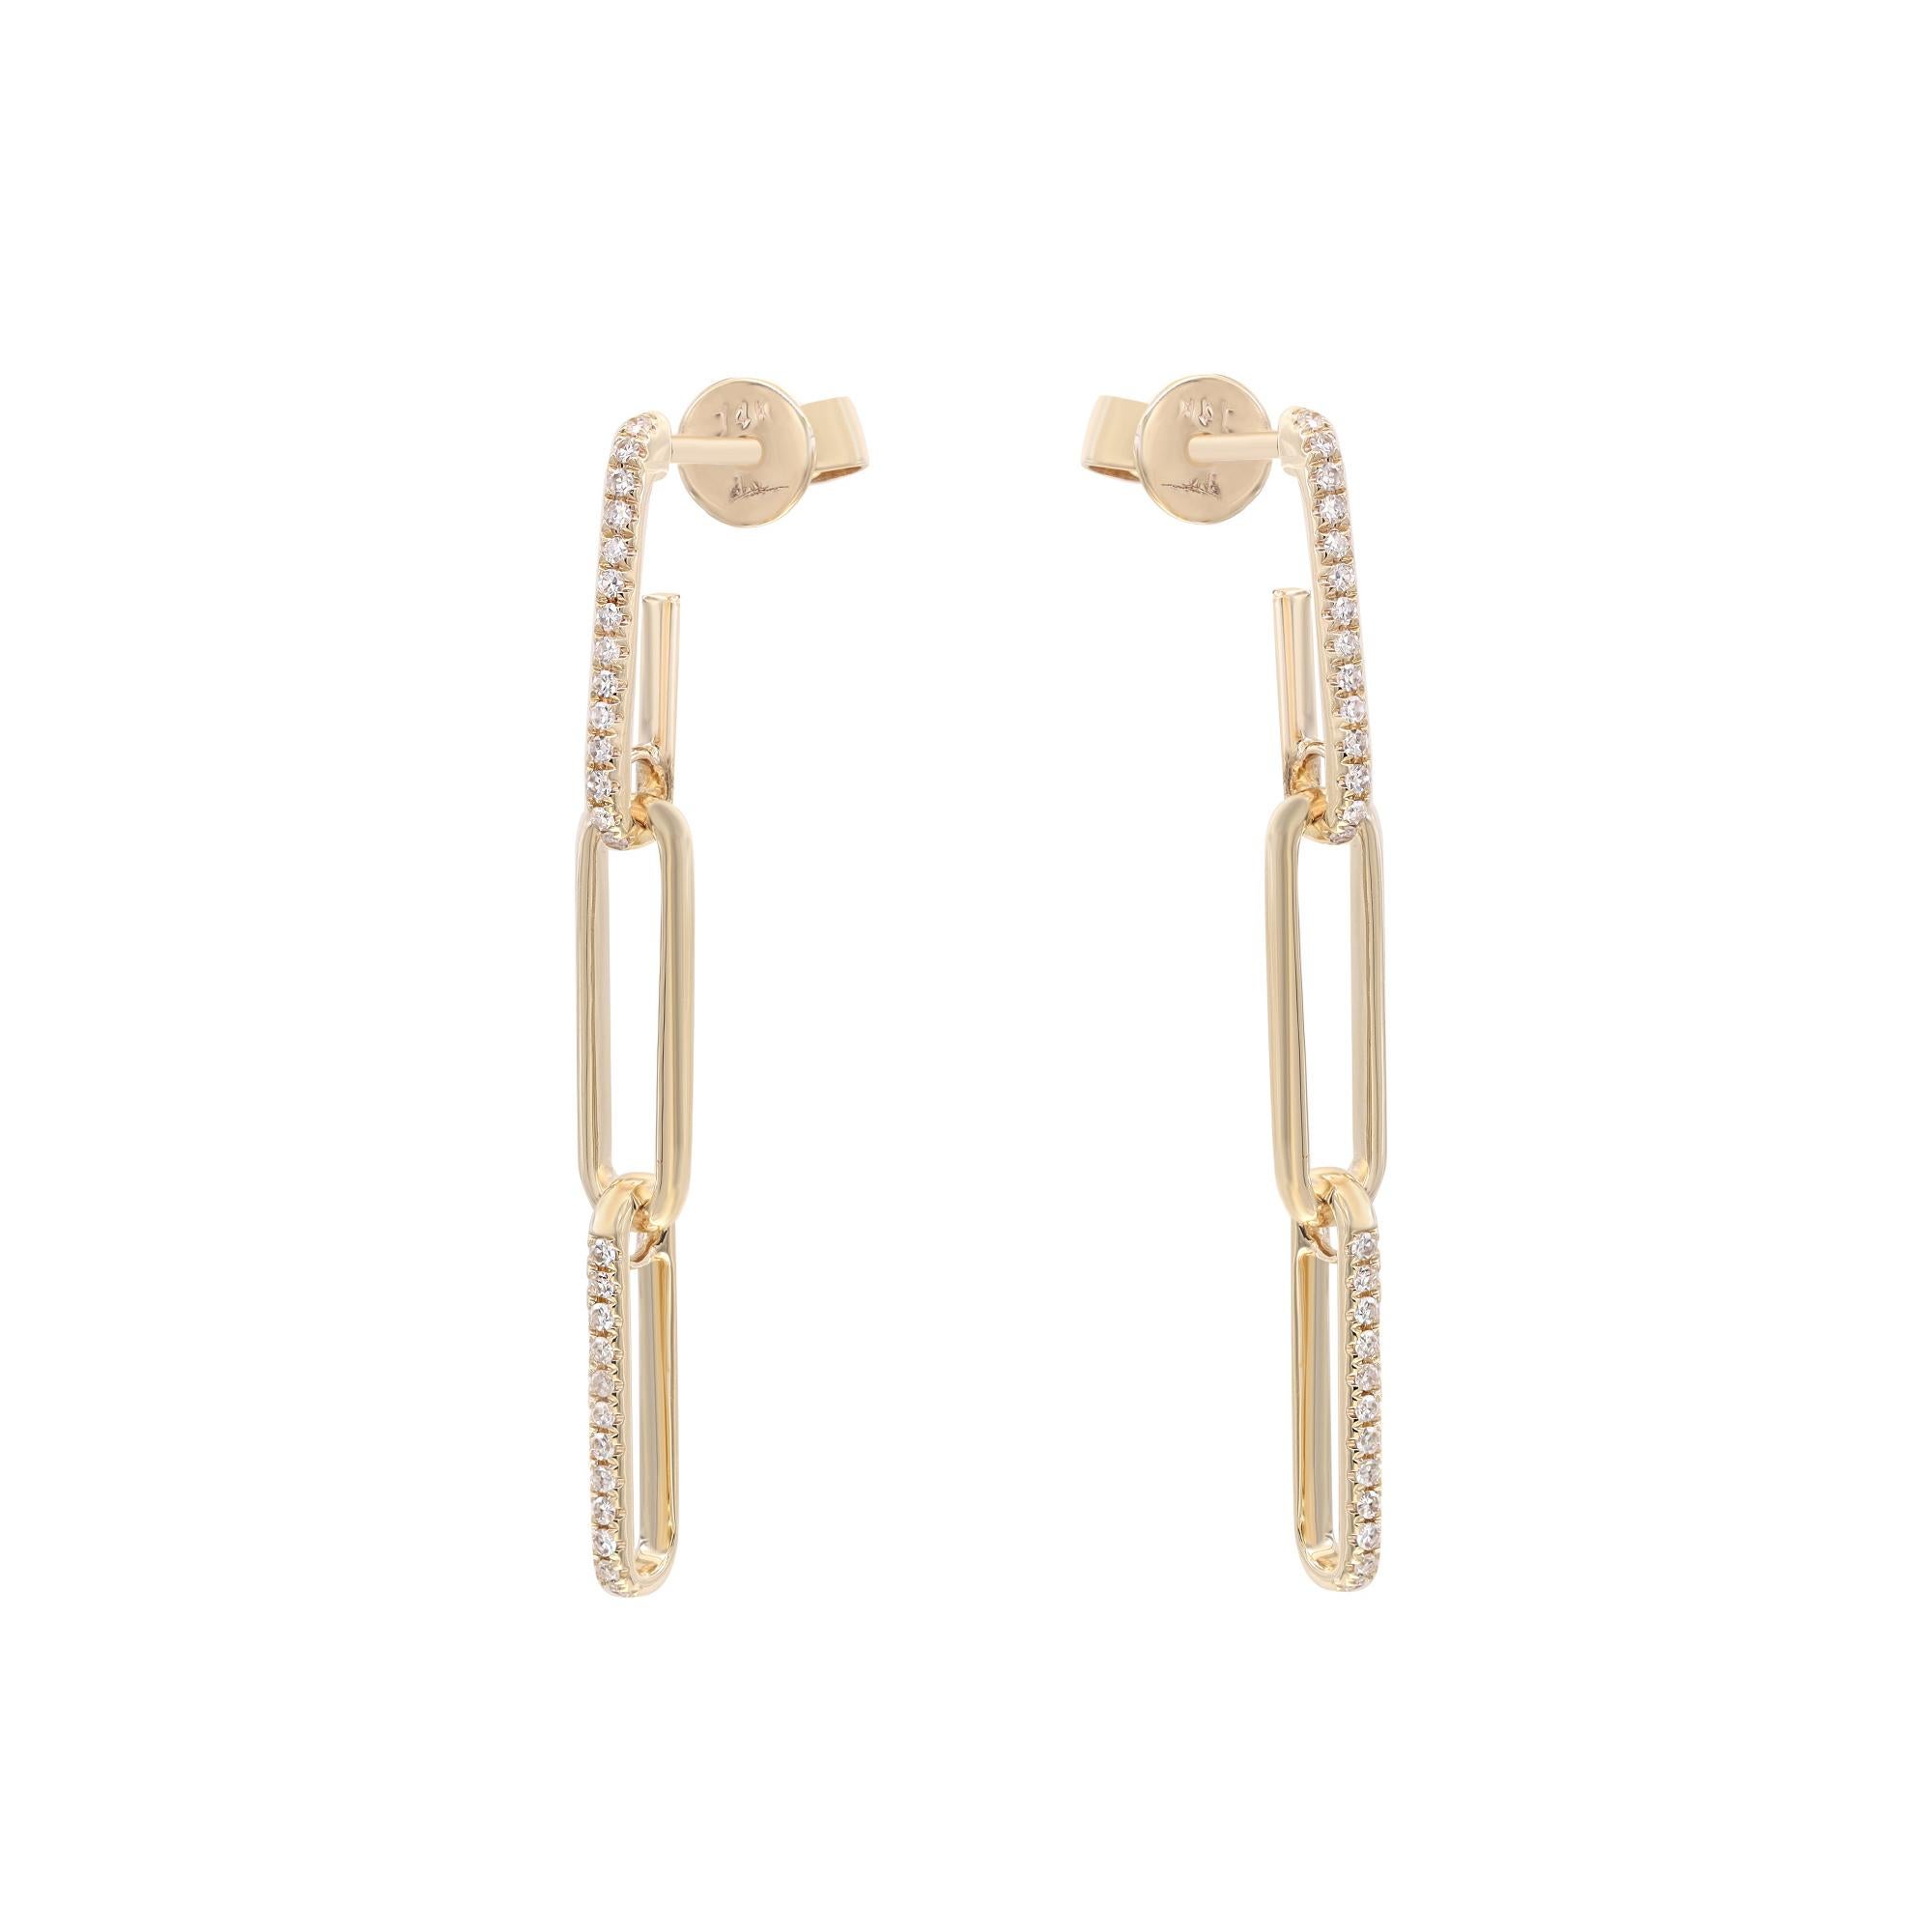 Certain to delight, this beautiful statement piece is perfect for day or night. Crafted in high polished 14k yellow gold. These paper clip links are designed in the latest fashion trend with alternating pave set round cut diamonds weighing 0.17cttw.